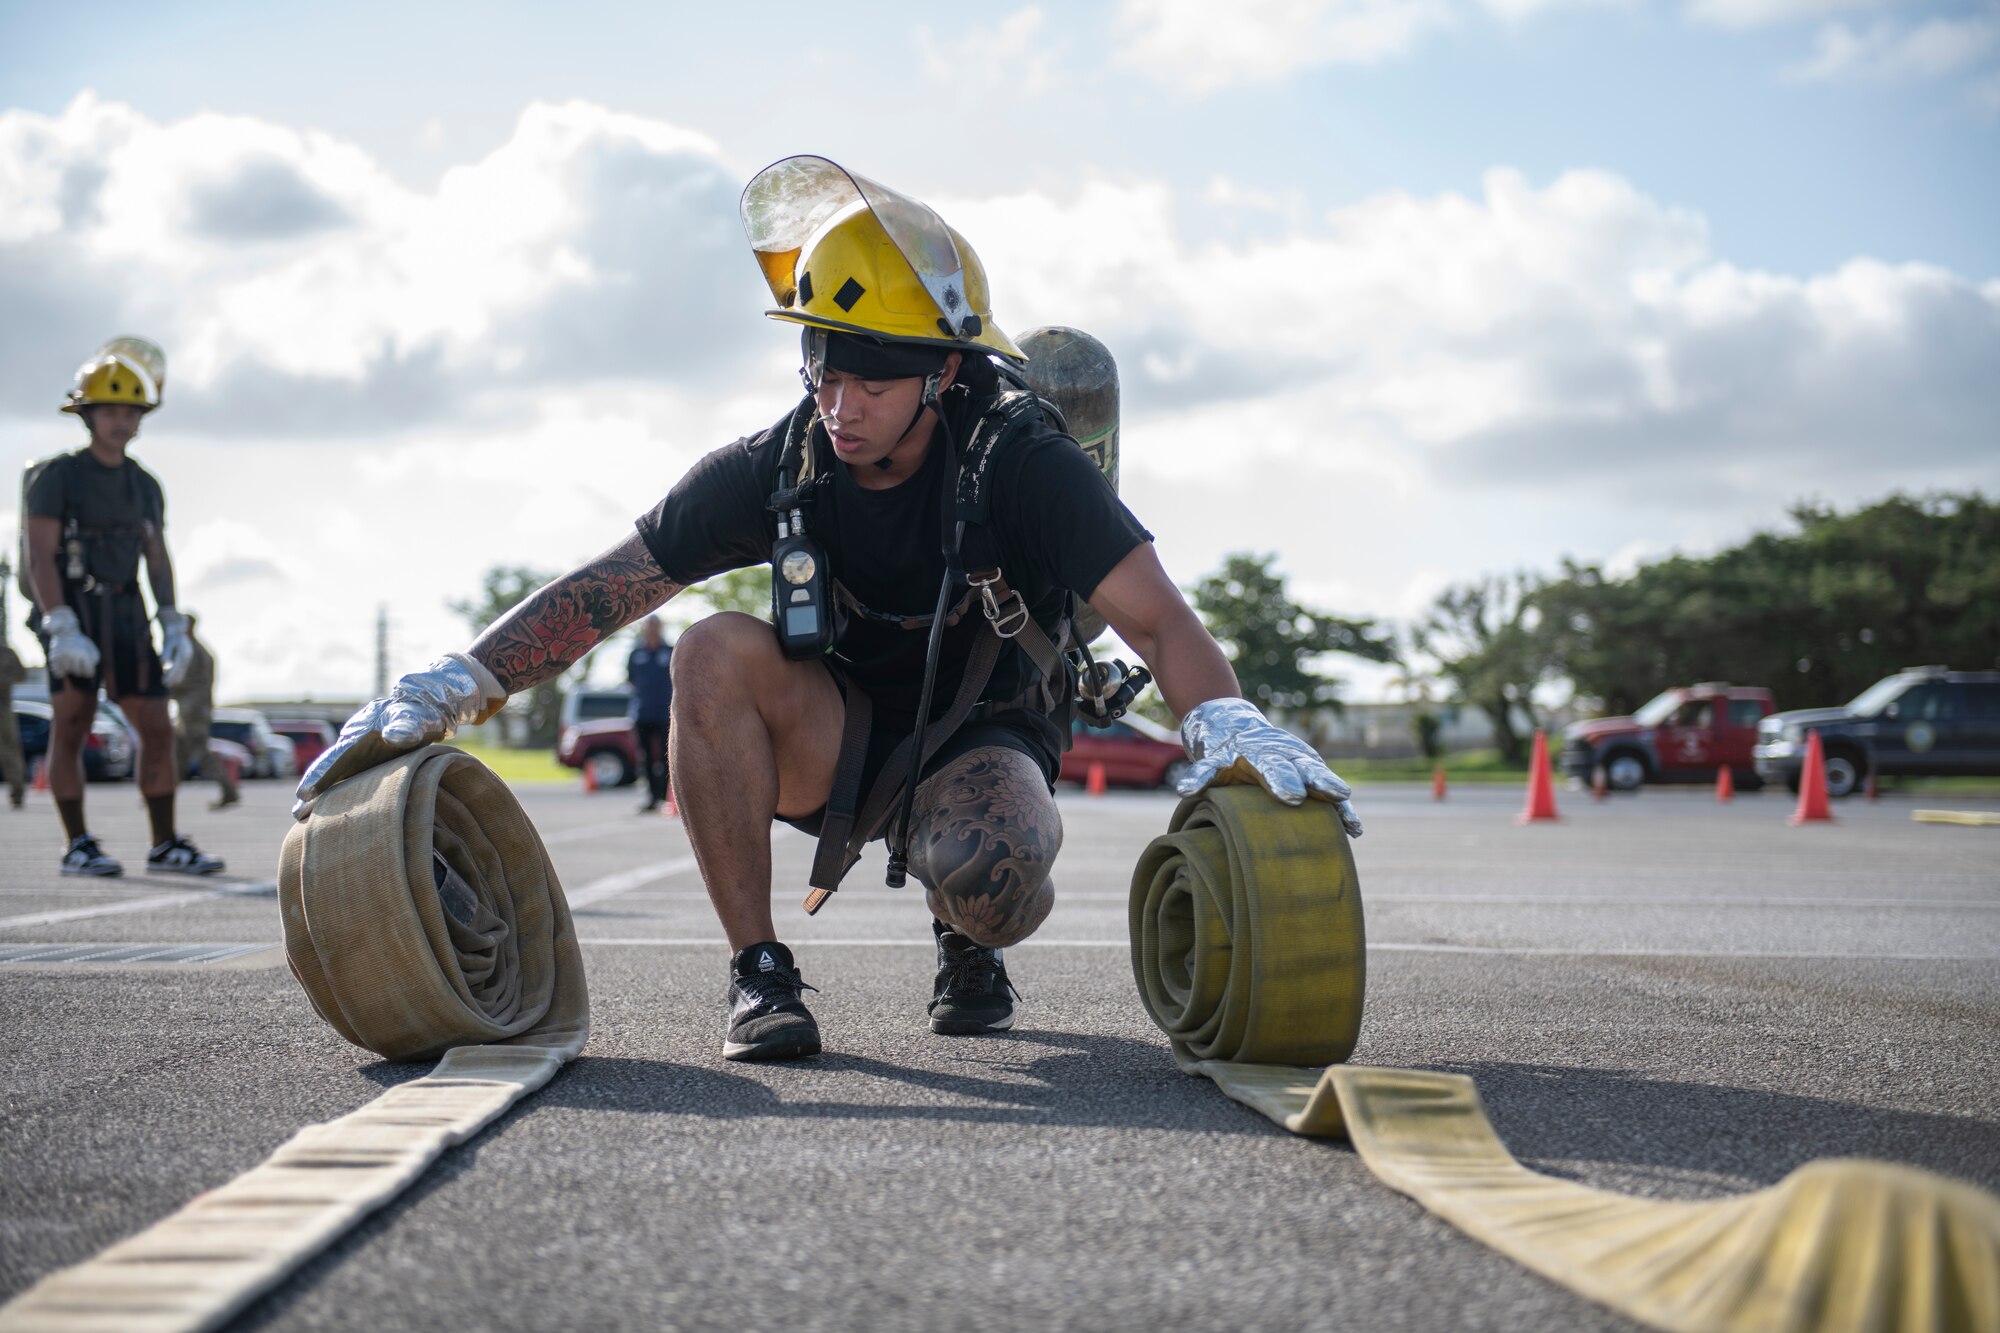 A U.S. Air Force Airman rolls hoses at the fire muster challenge during National Fire Prevention Week at Kadena Air Base, Japan, Oct. 6, 2022. The competition gave bystanders and participants an opportunity to see and experience the various types of physical exertion firefighters must prepare for when responding to emergencies. (U.S. Air Force photo by Senior Airman Jessi Roth)